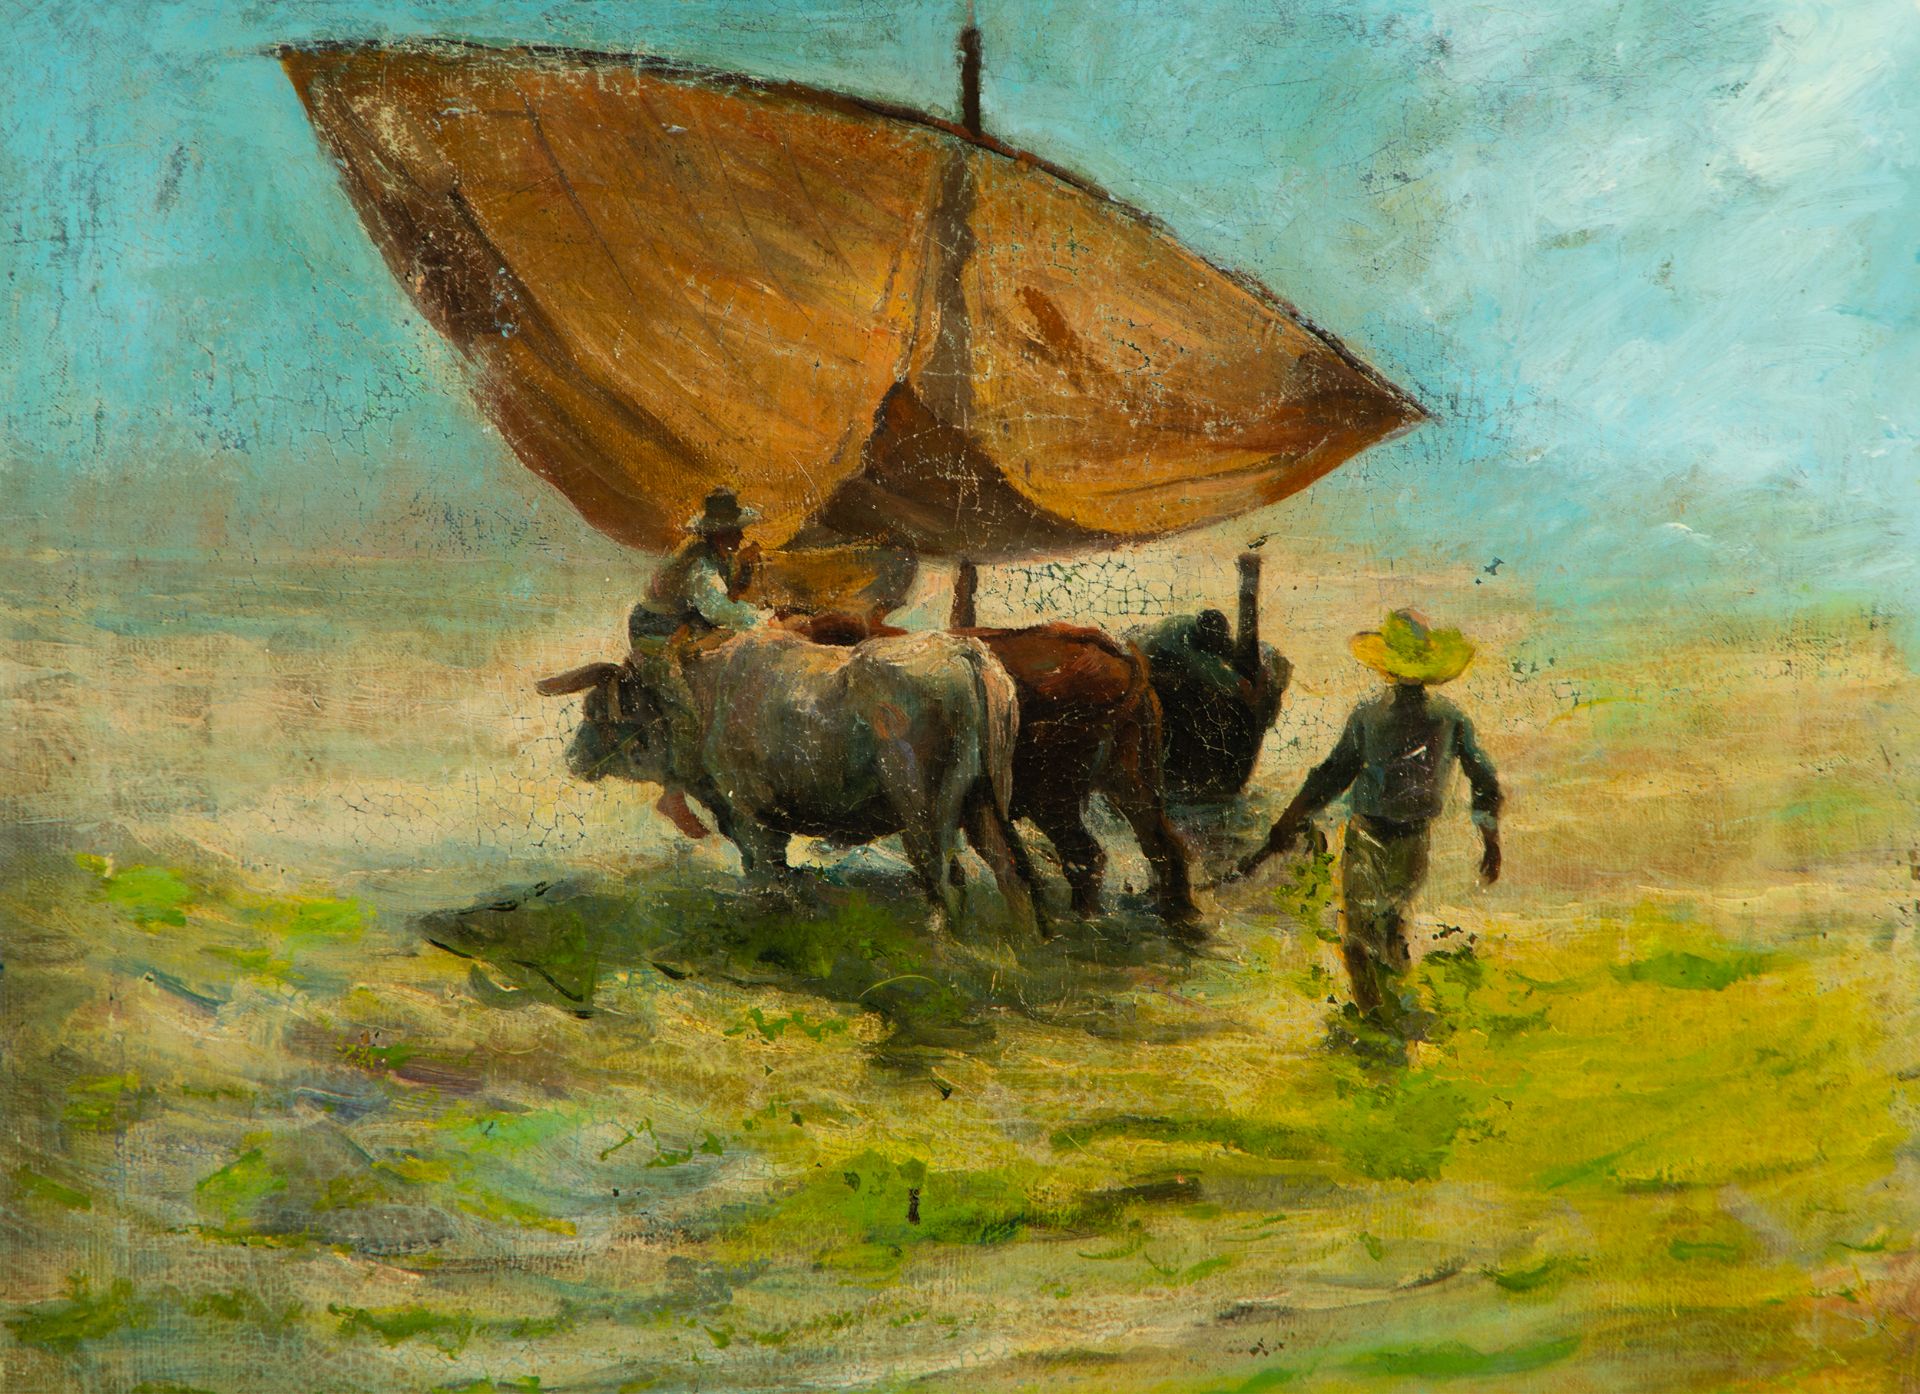 Buffaloes Plowing, Valencian school of the 19th century - Image 2 of 4